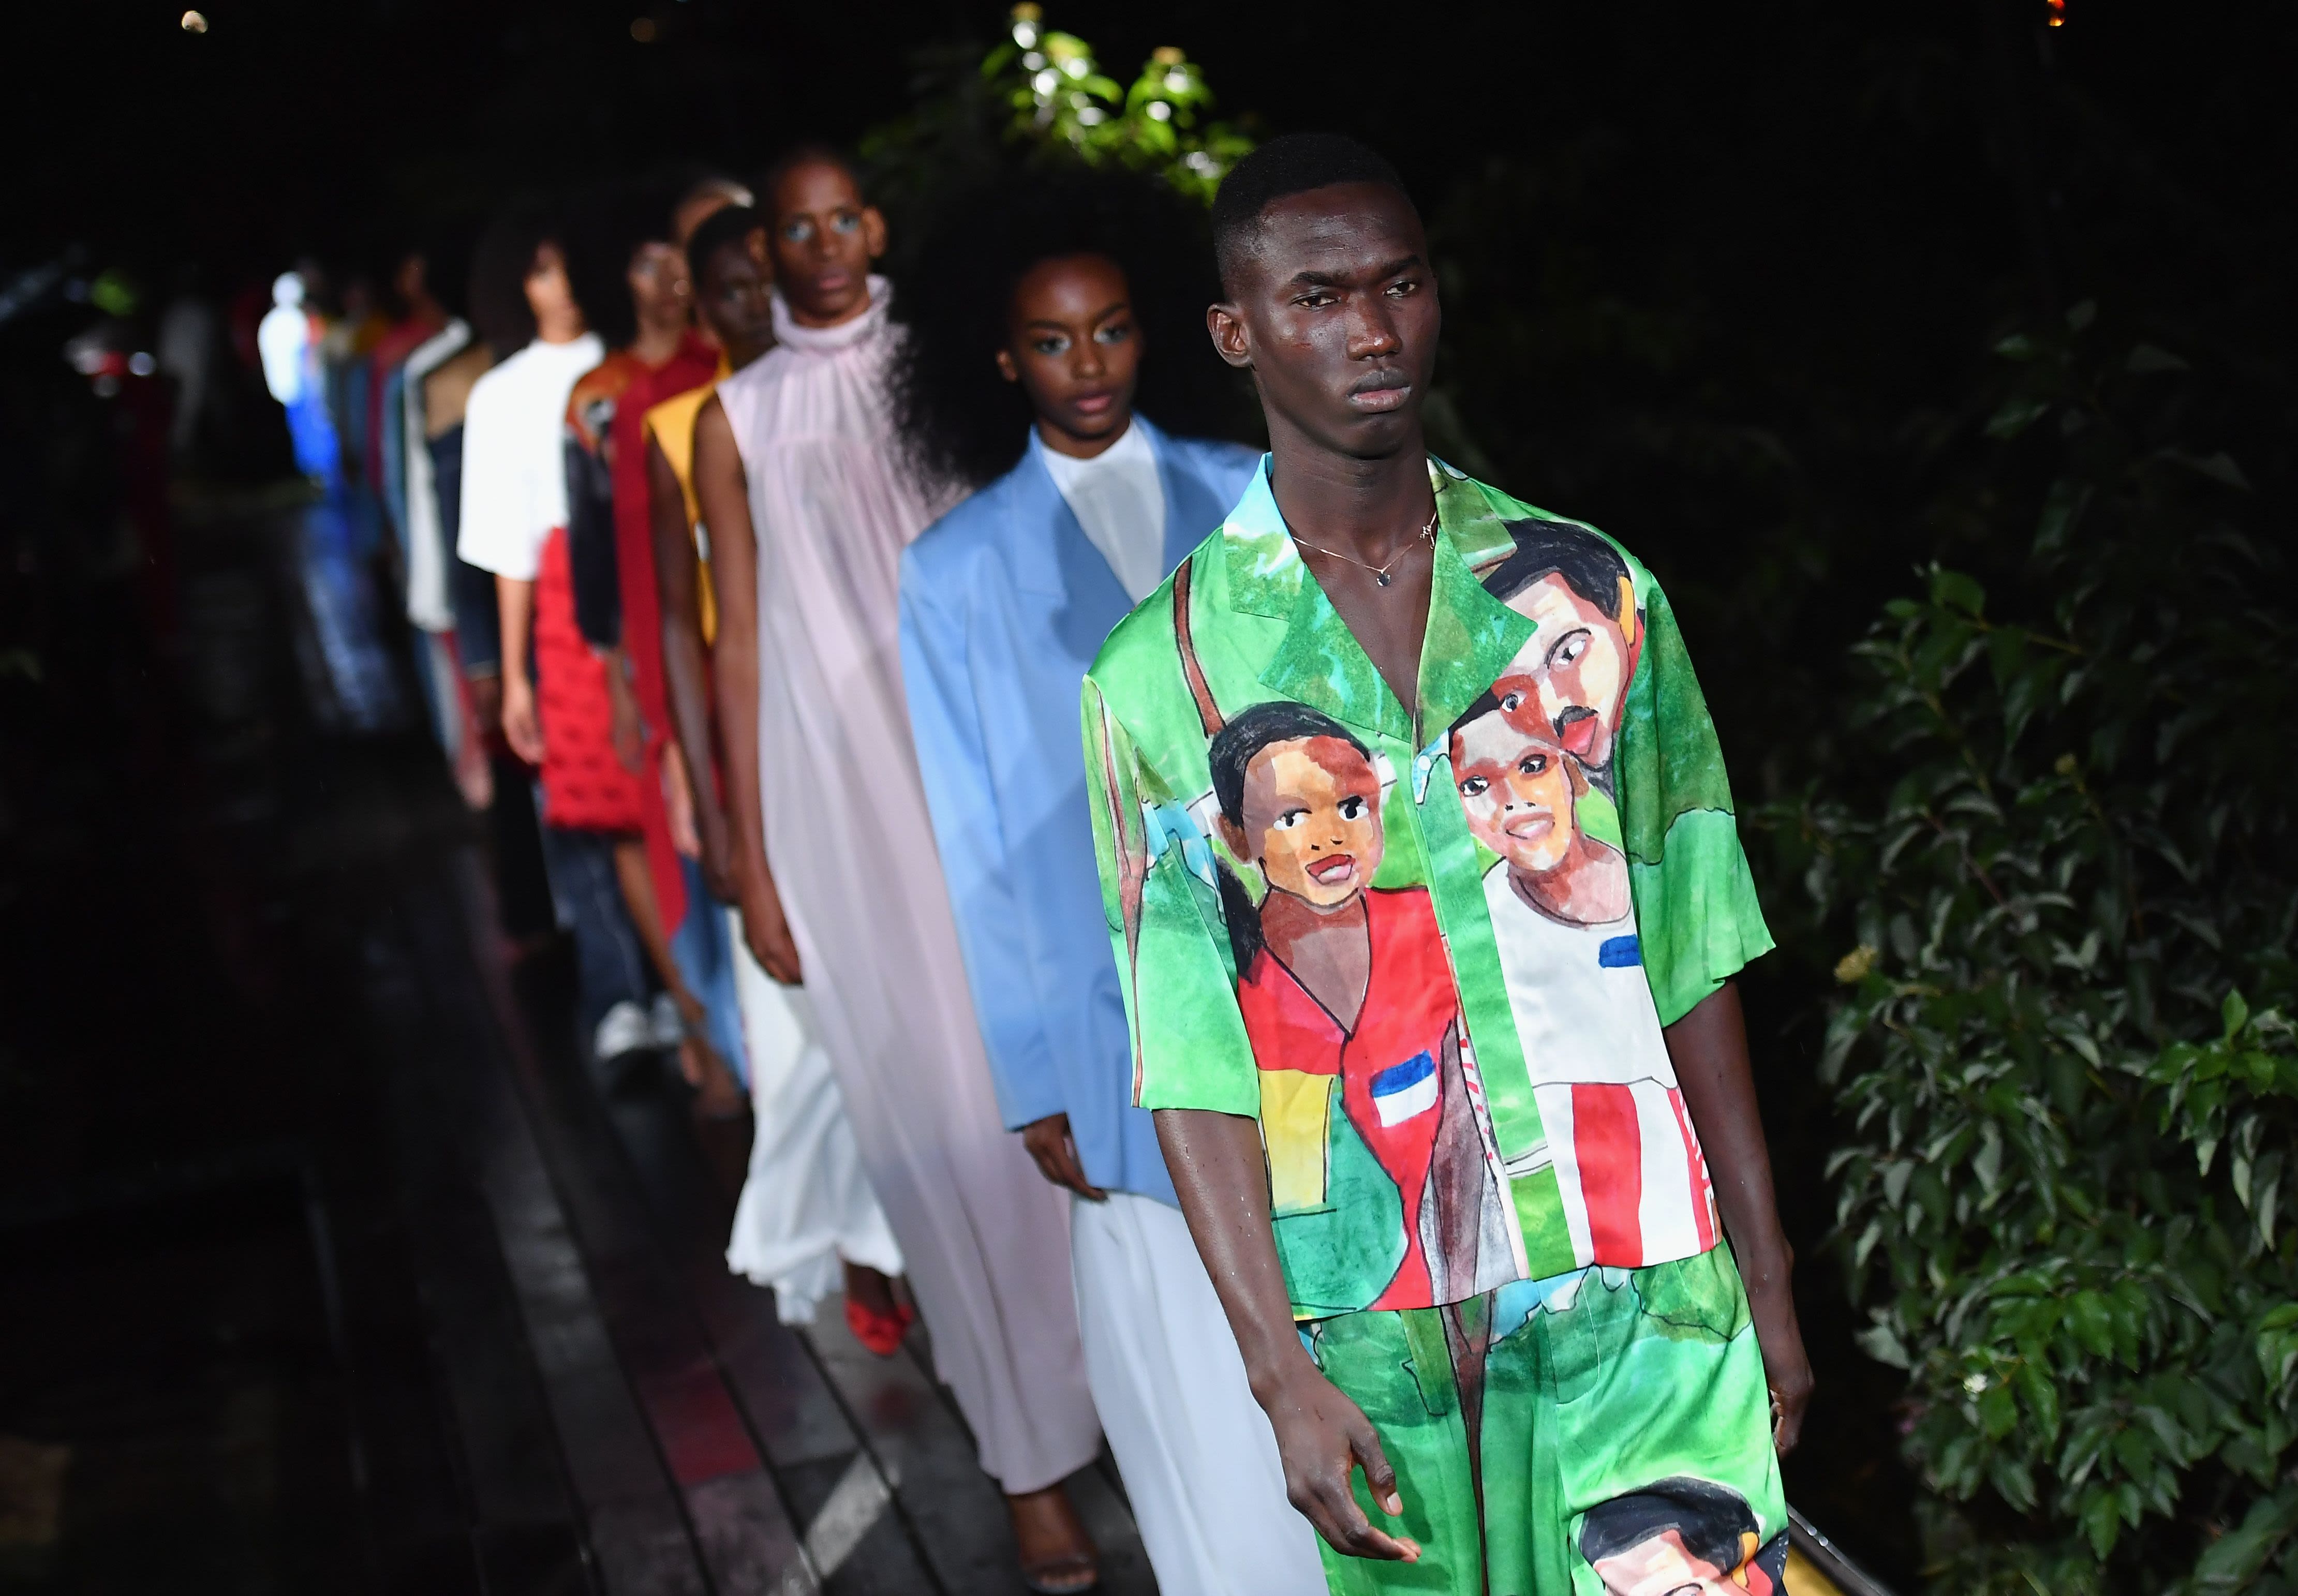 Pyer Moss aka Kerby Jean-Raymond closes Paris Haute Couture with Wat U Iz  collection celebrating Black Invention – A Shaded View on Fashion